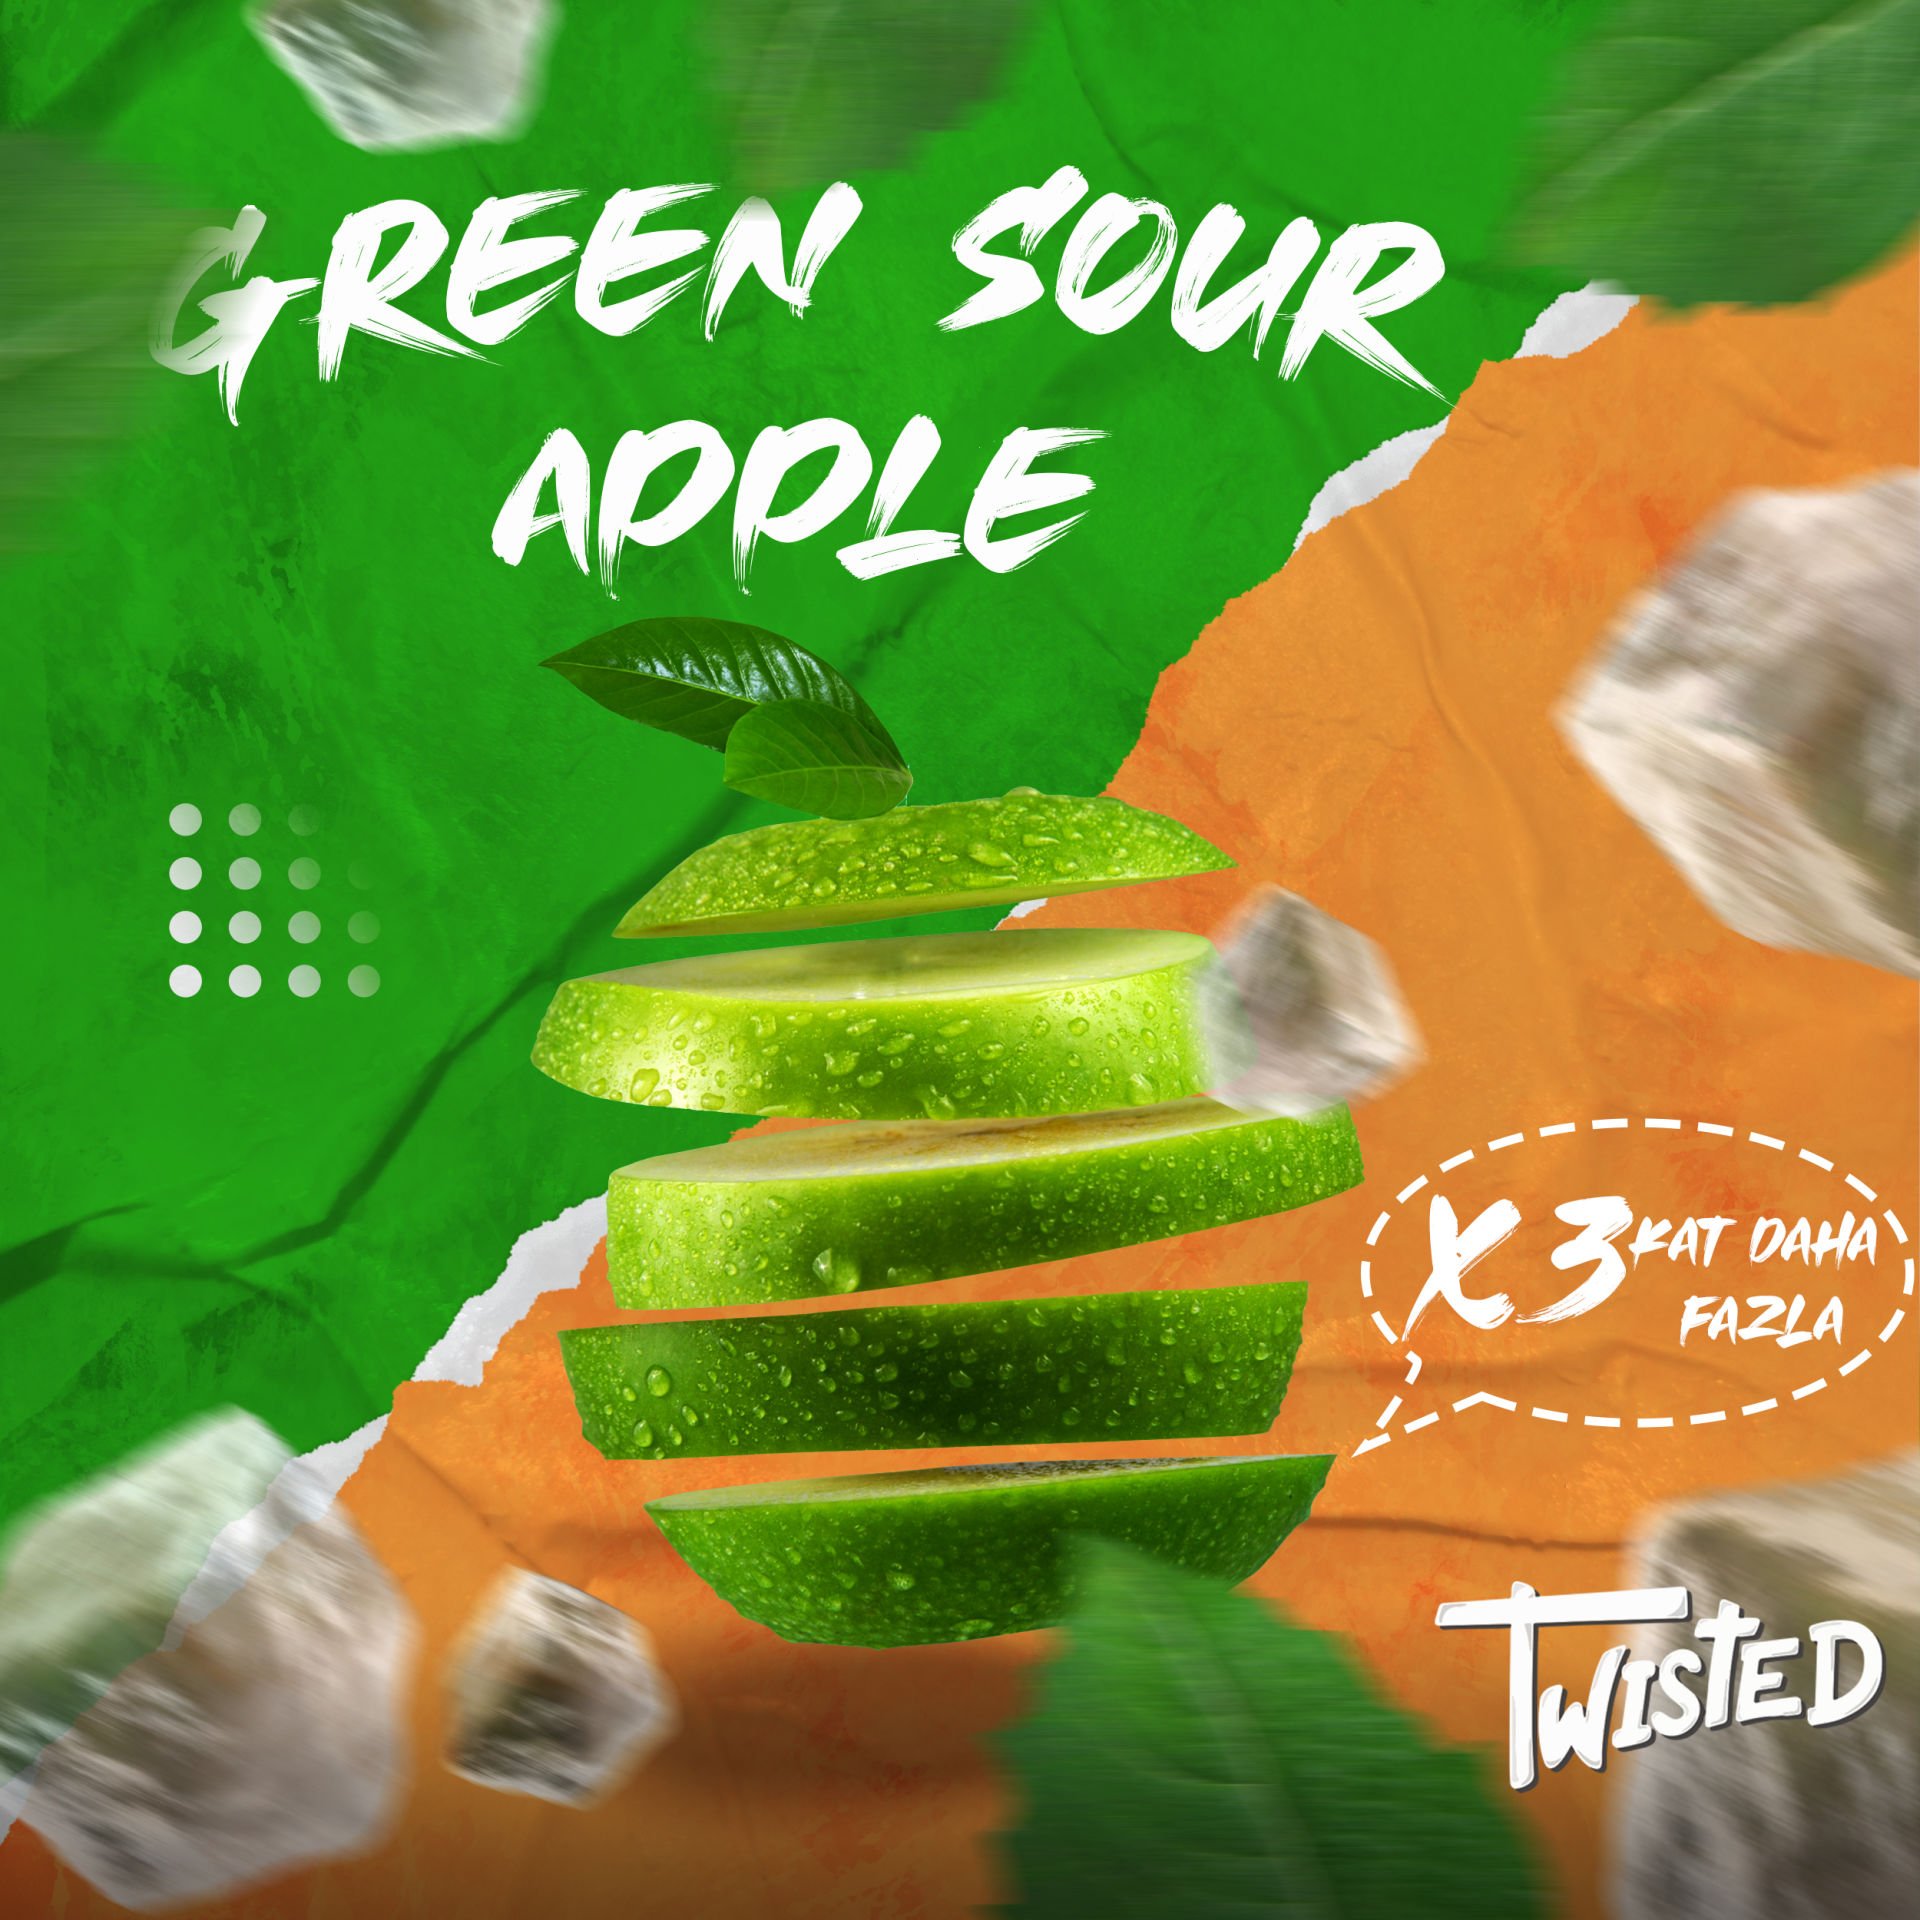 Twisted Green Sour Apple